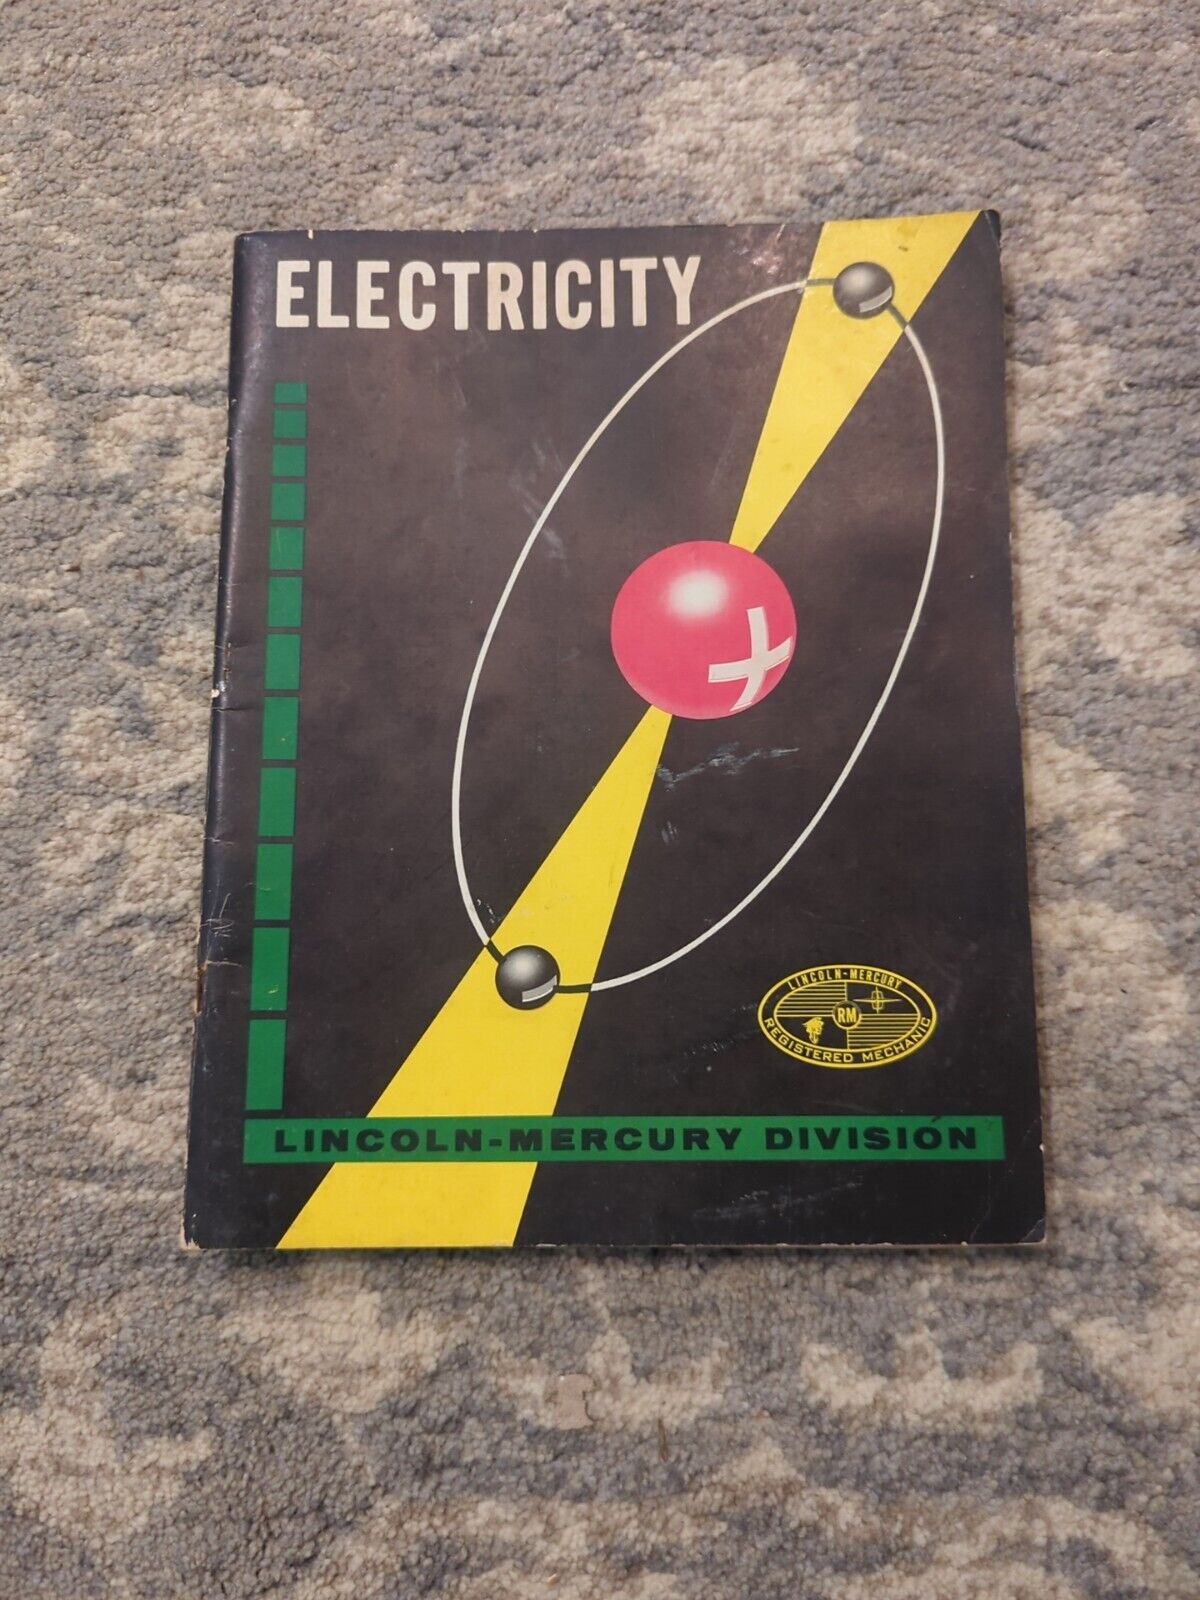 Vtg 1960 Lincoln Mercury Electricity Booklet Mechanic Cars Vehicle History 